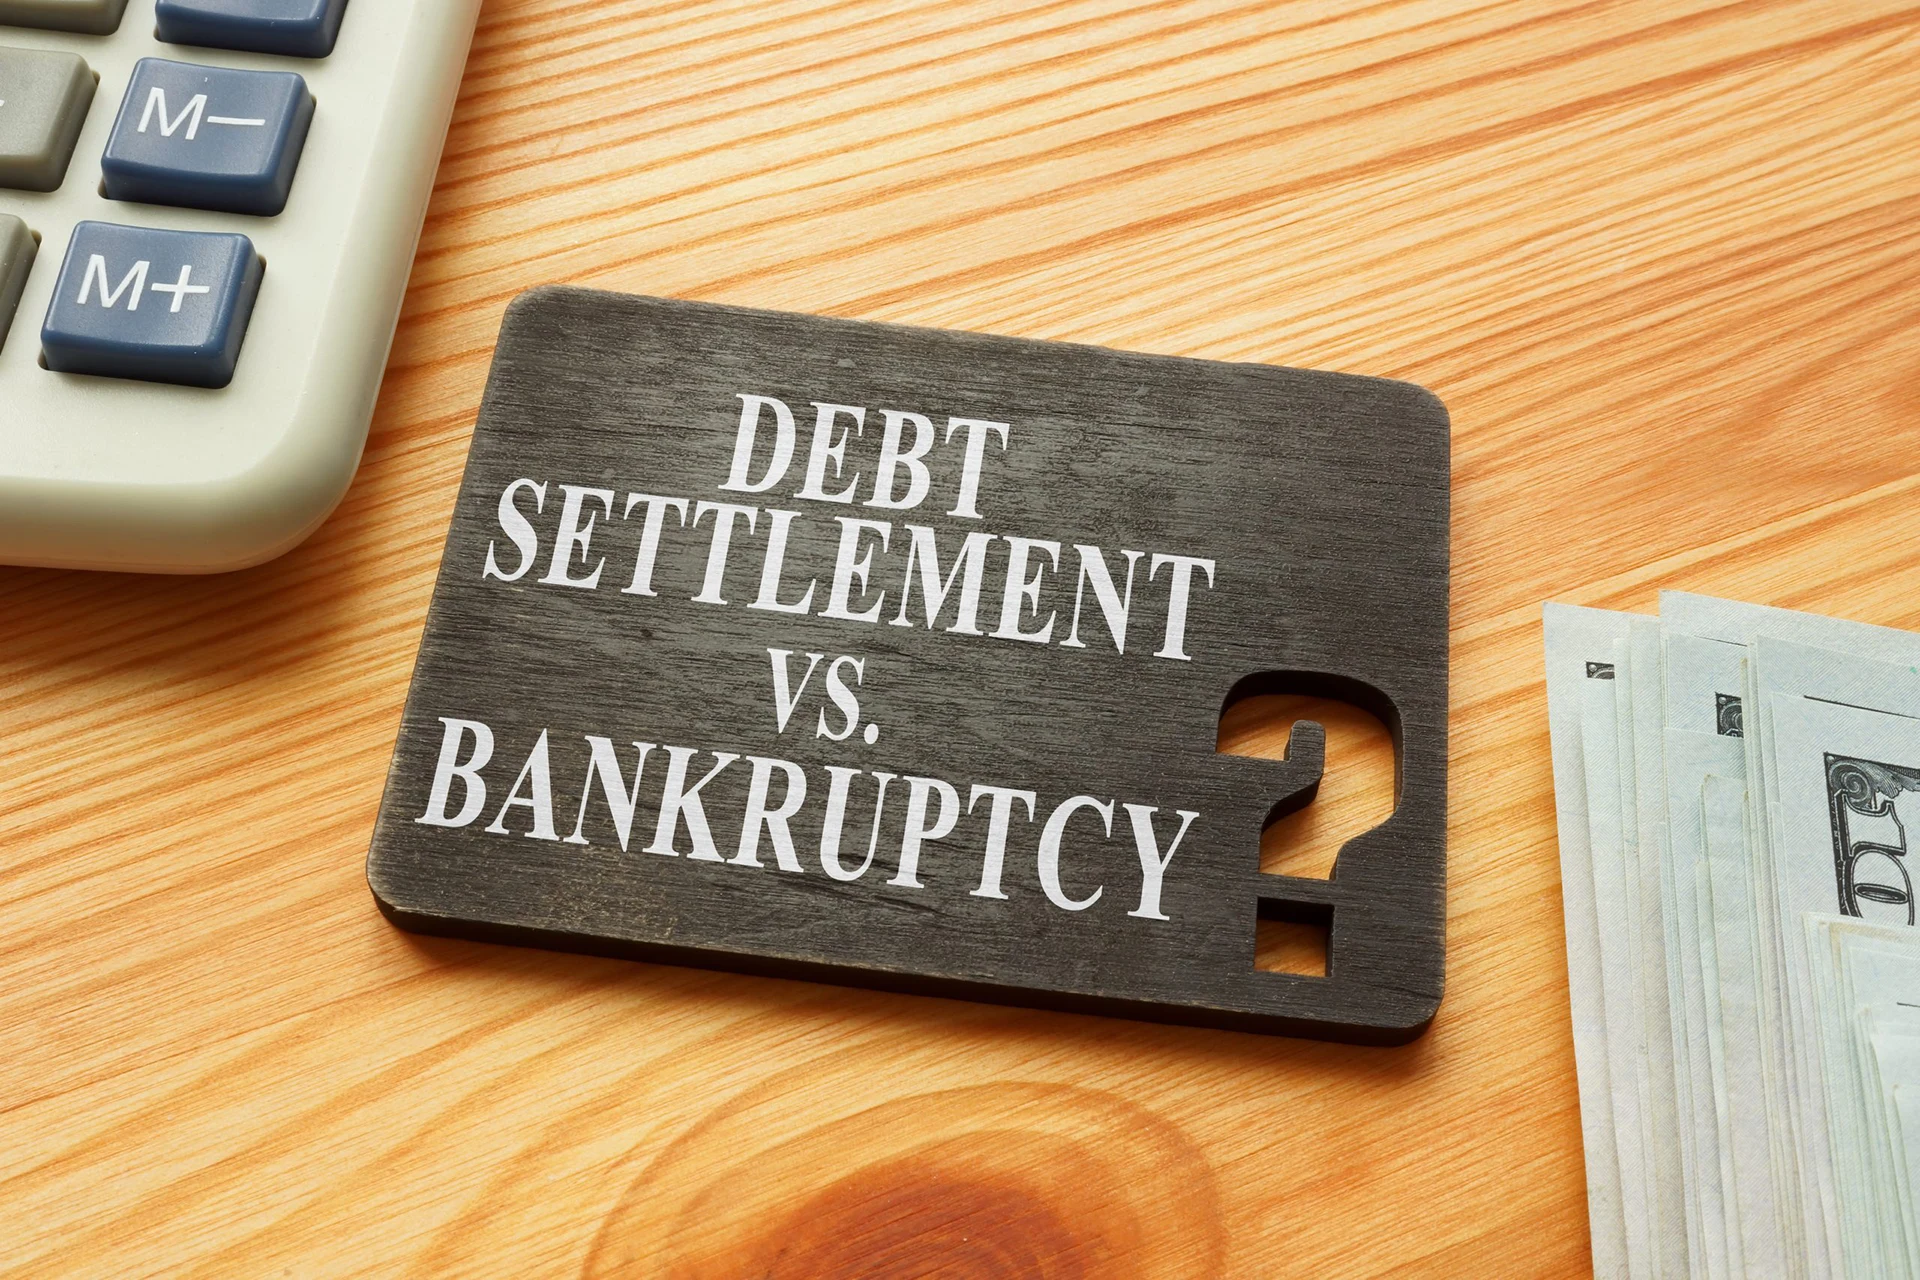 Debt settlement vs. Bankruptcy—Pros and Cons